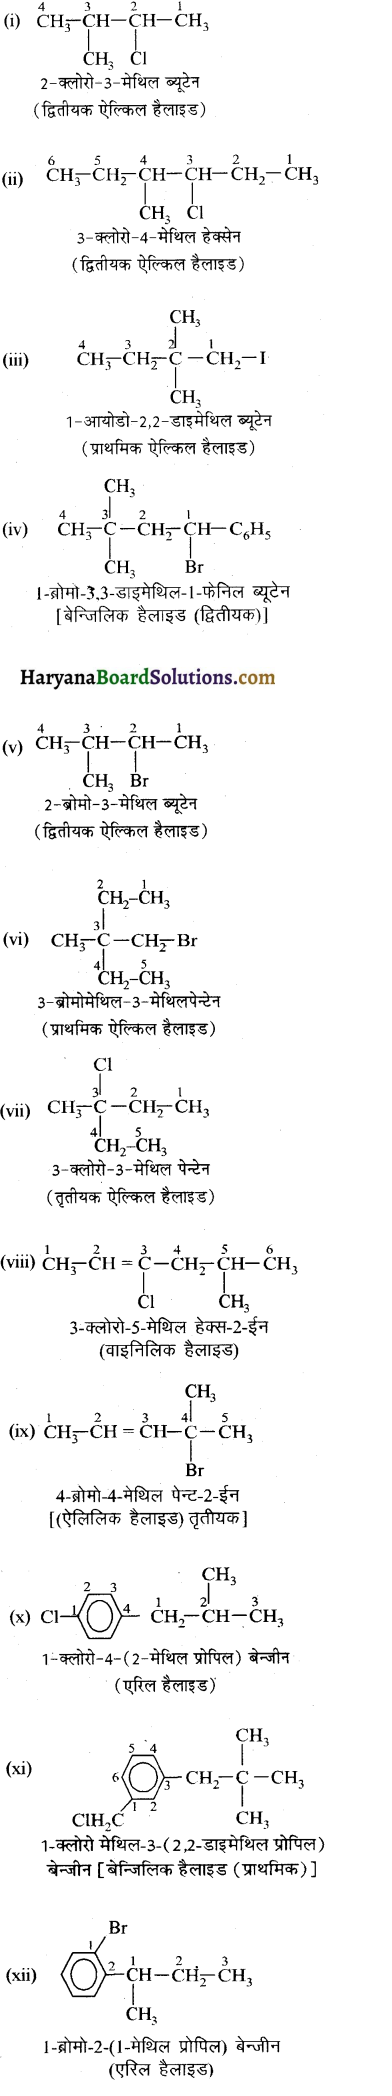 HBSE 12th Class Chemistry Solutions Chapter 10 हैलोऐल्केन तथा हैलोऐरीन 1